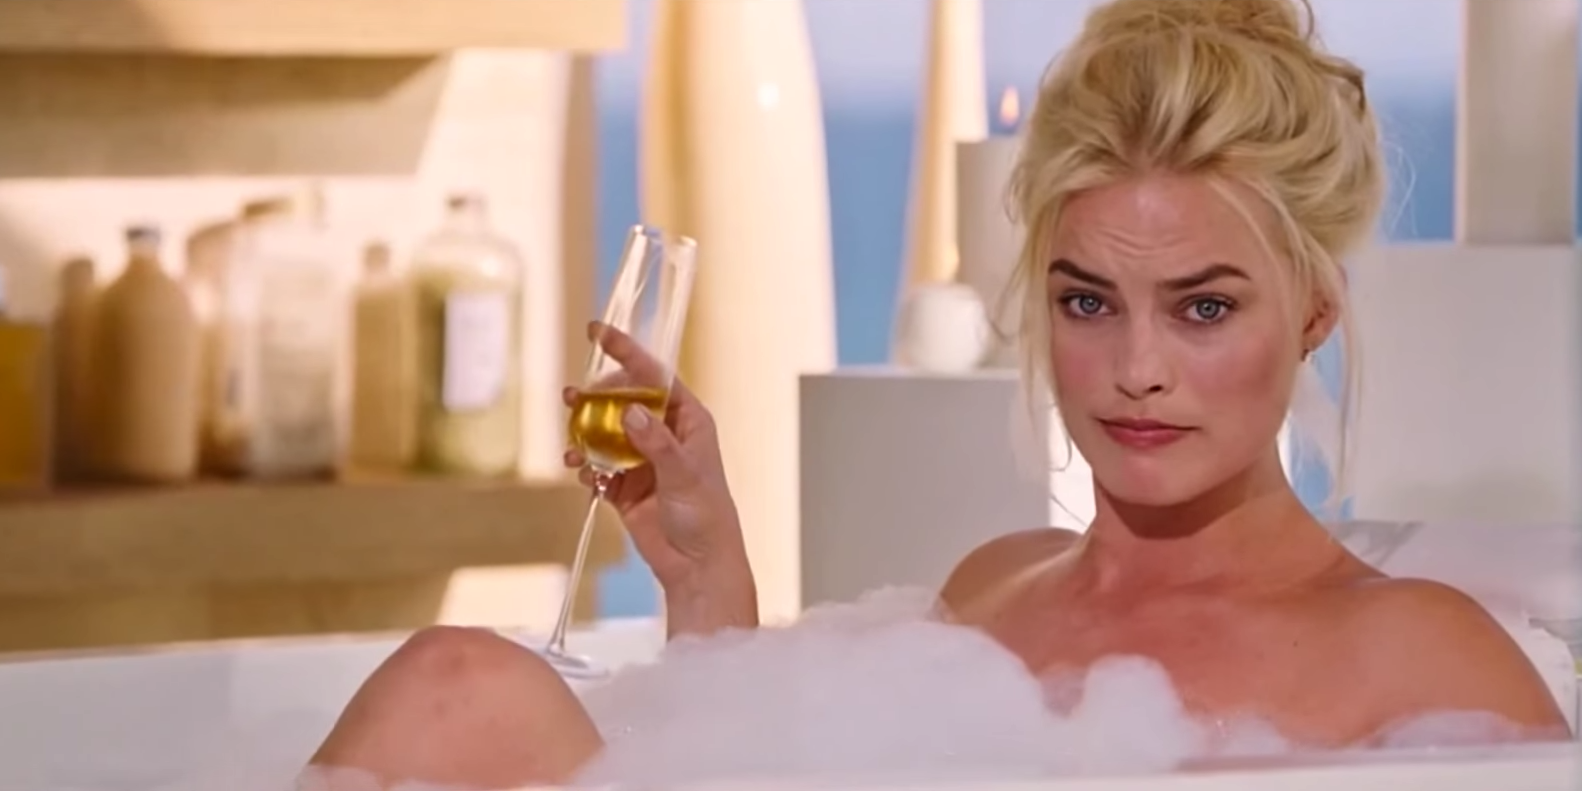 Margot Robbie as herself in The Big Short, sipping champagne in a bubble bath